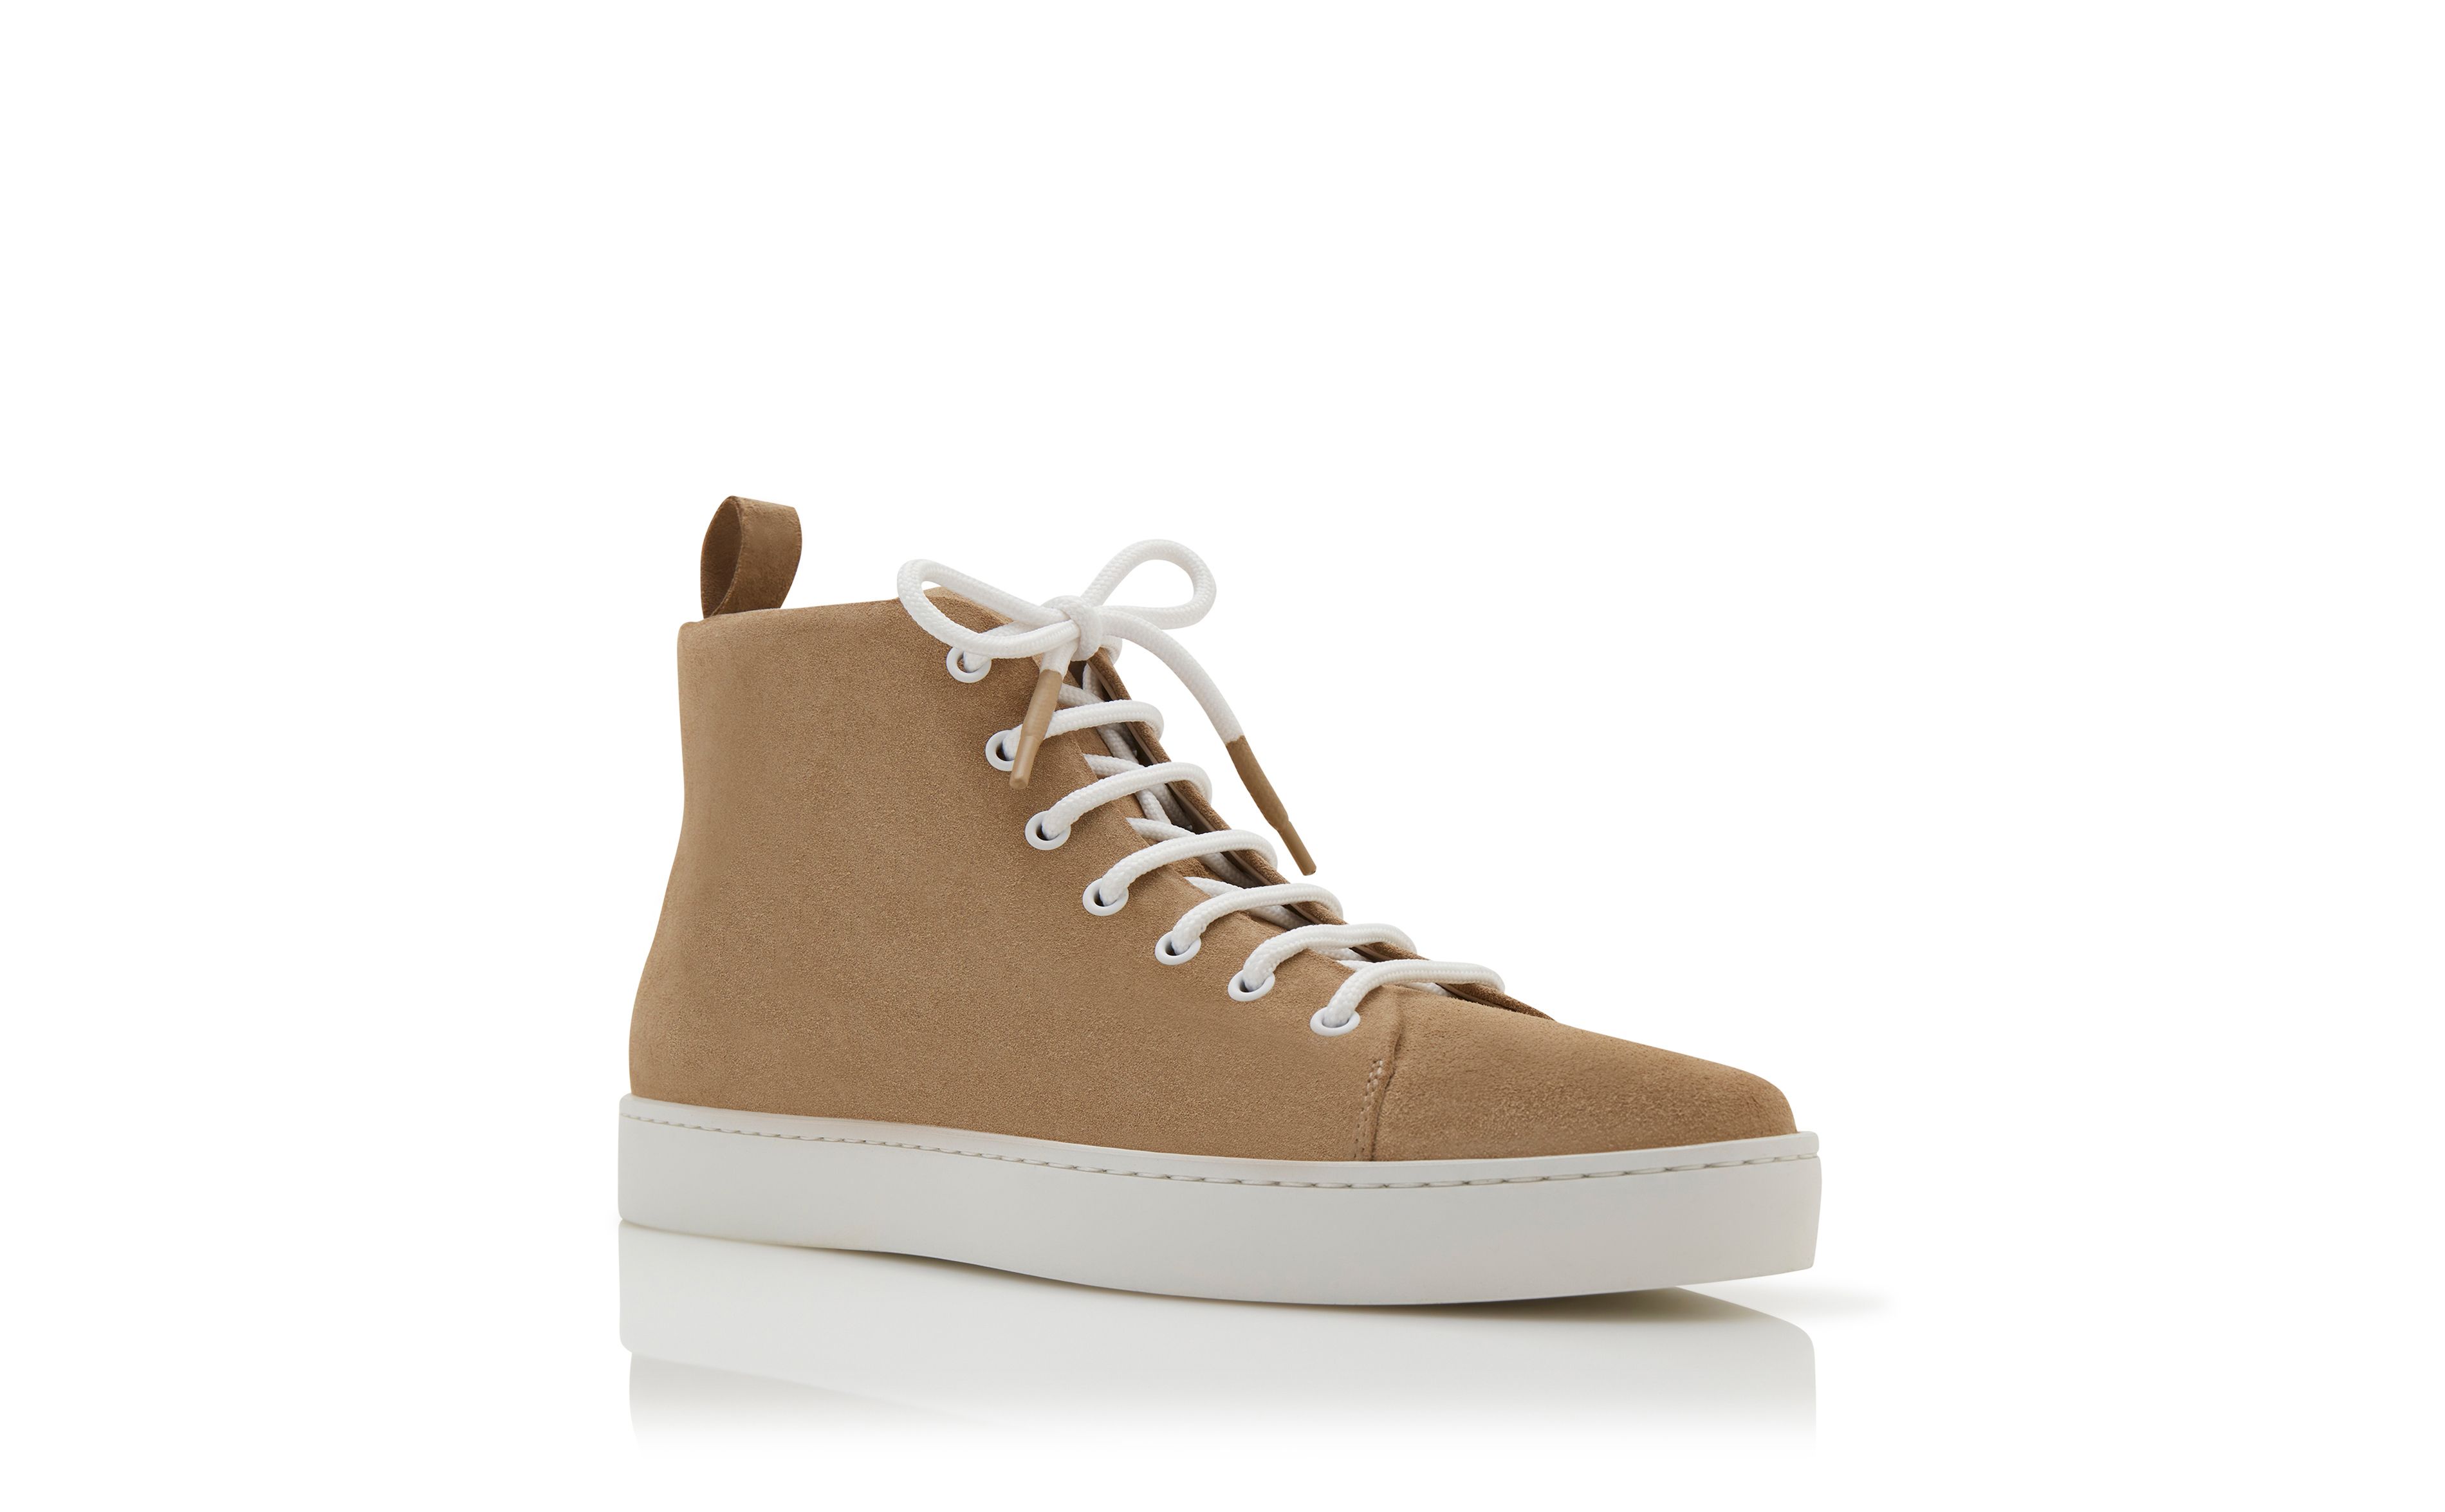 Designer Light Brown Suede Lace Up Sneakers - Image Upsell